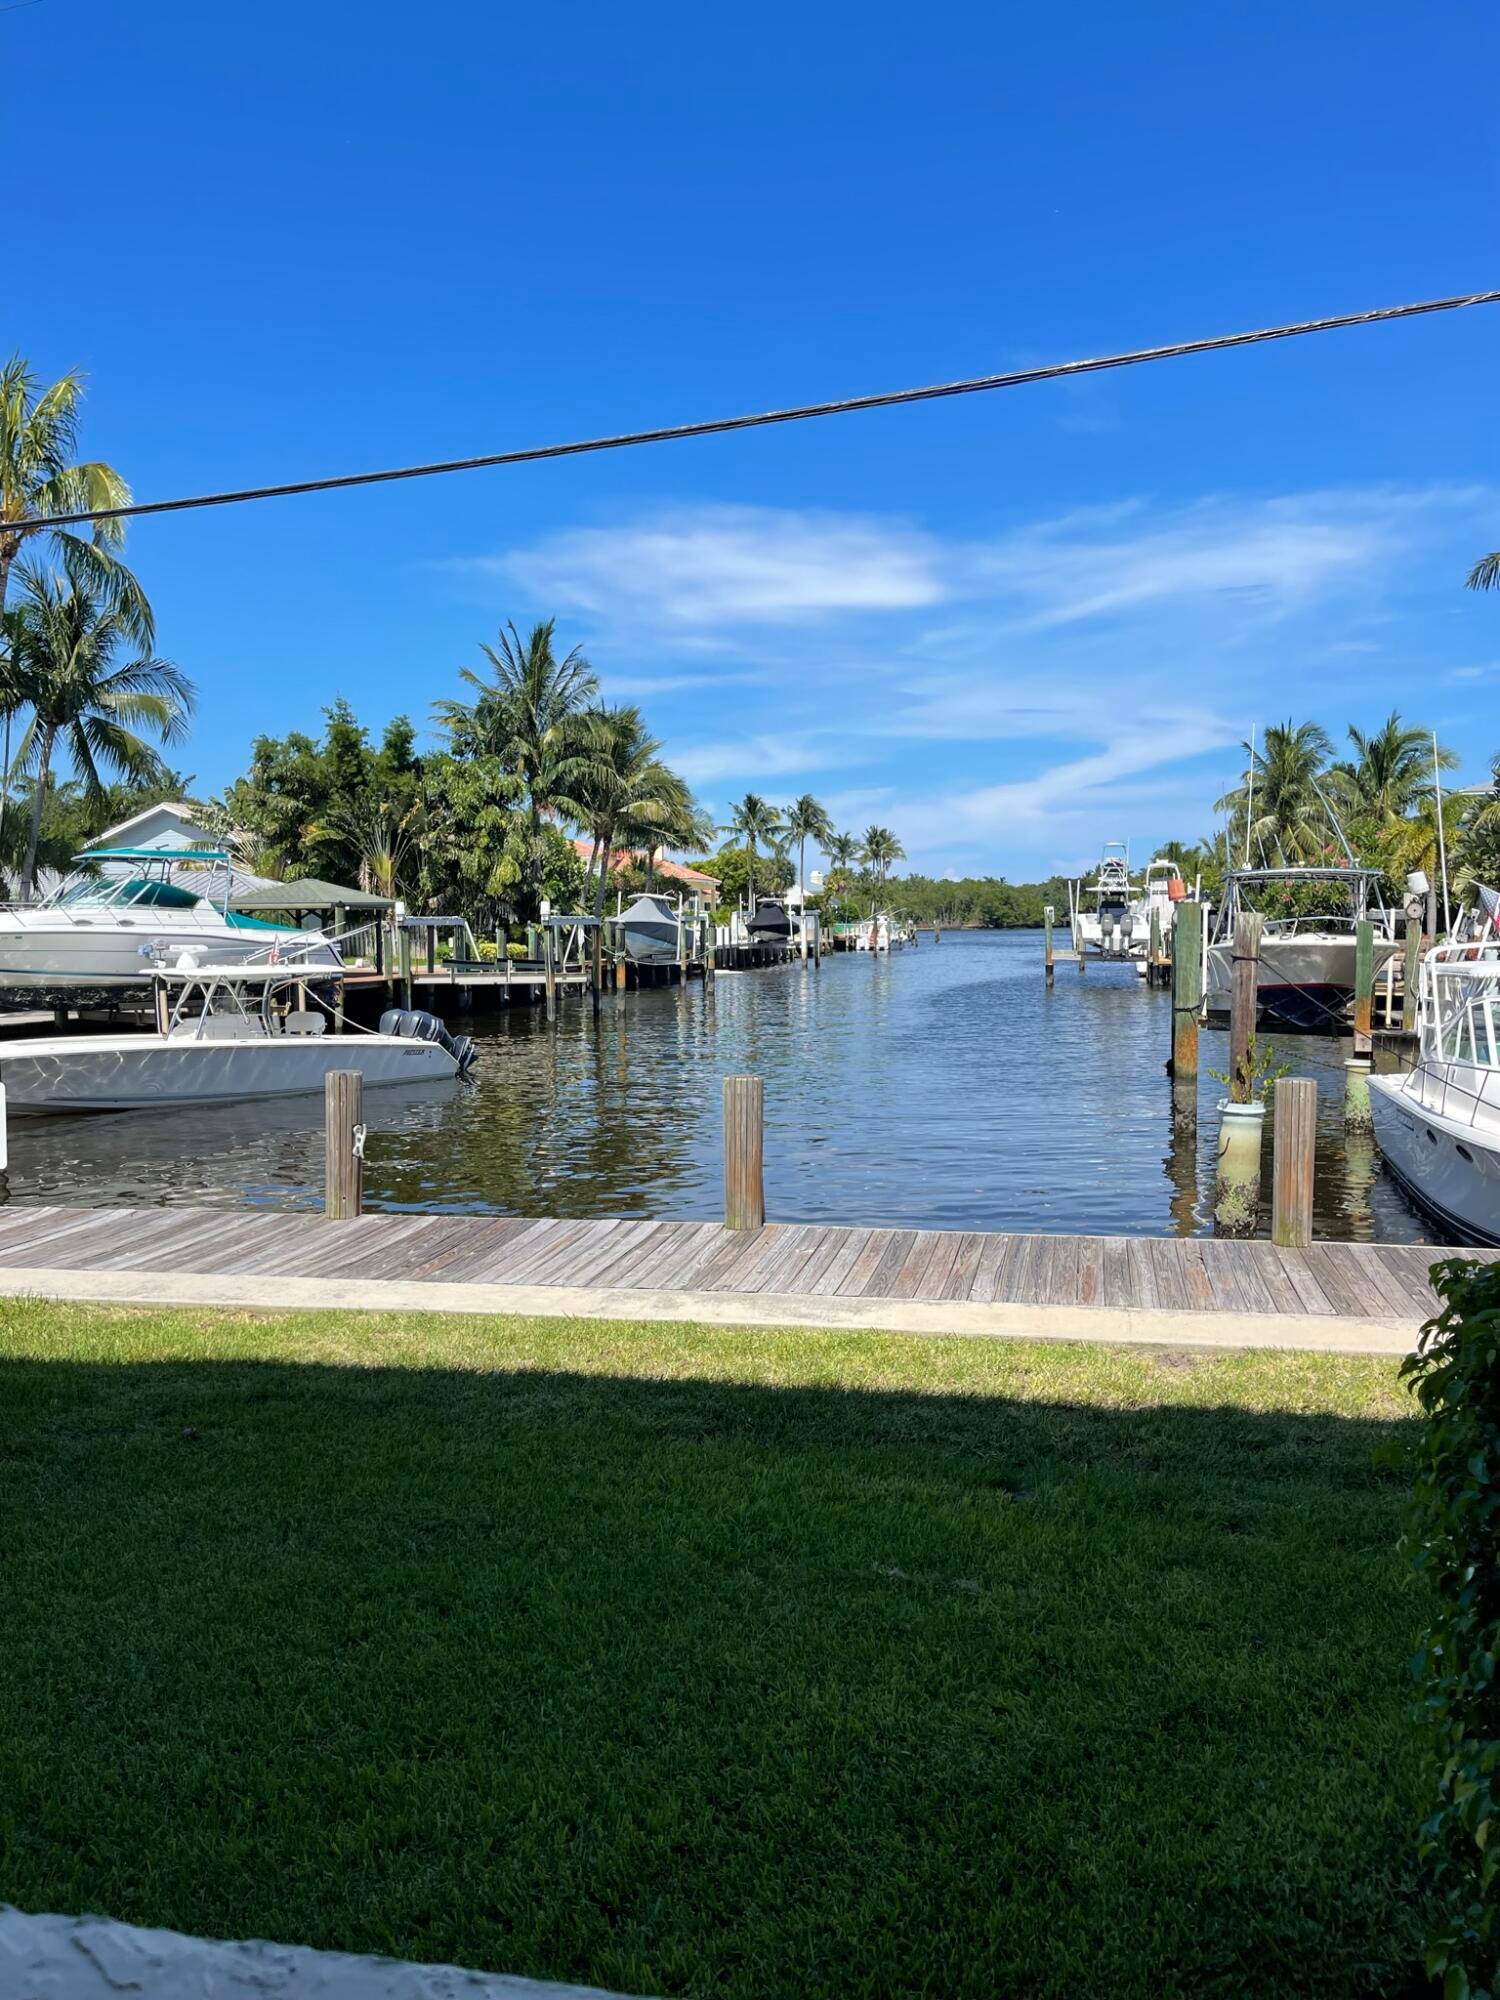 Excellent location for a professional office condo in this intracoastal building overlooking boat docks.